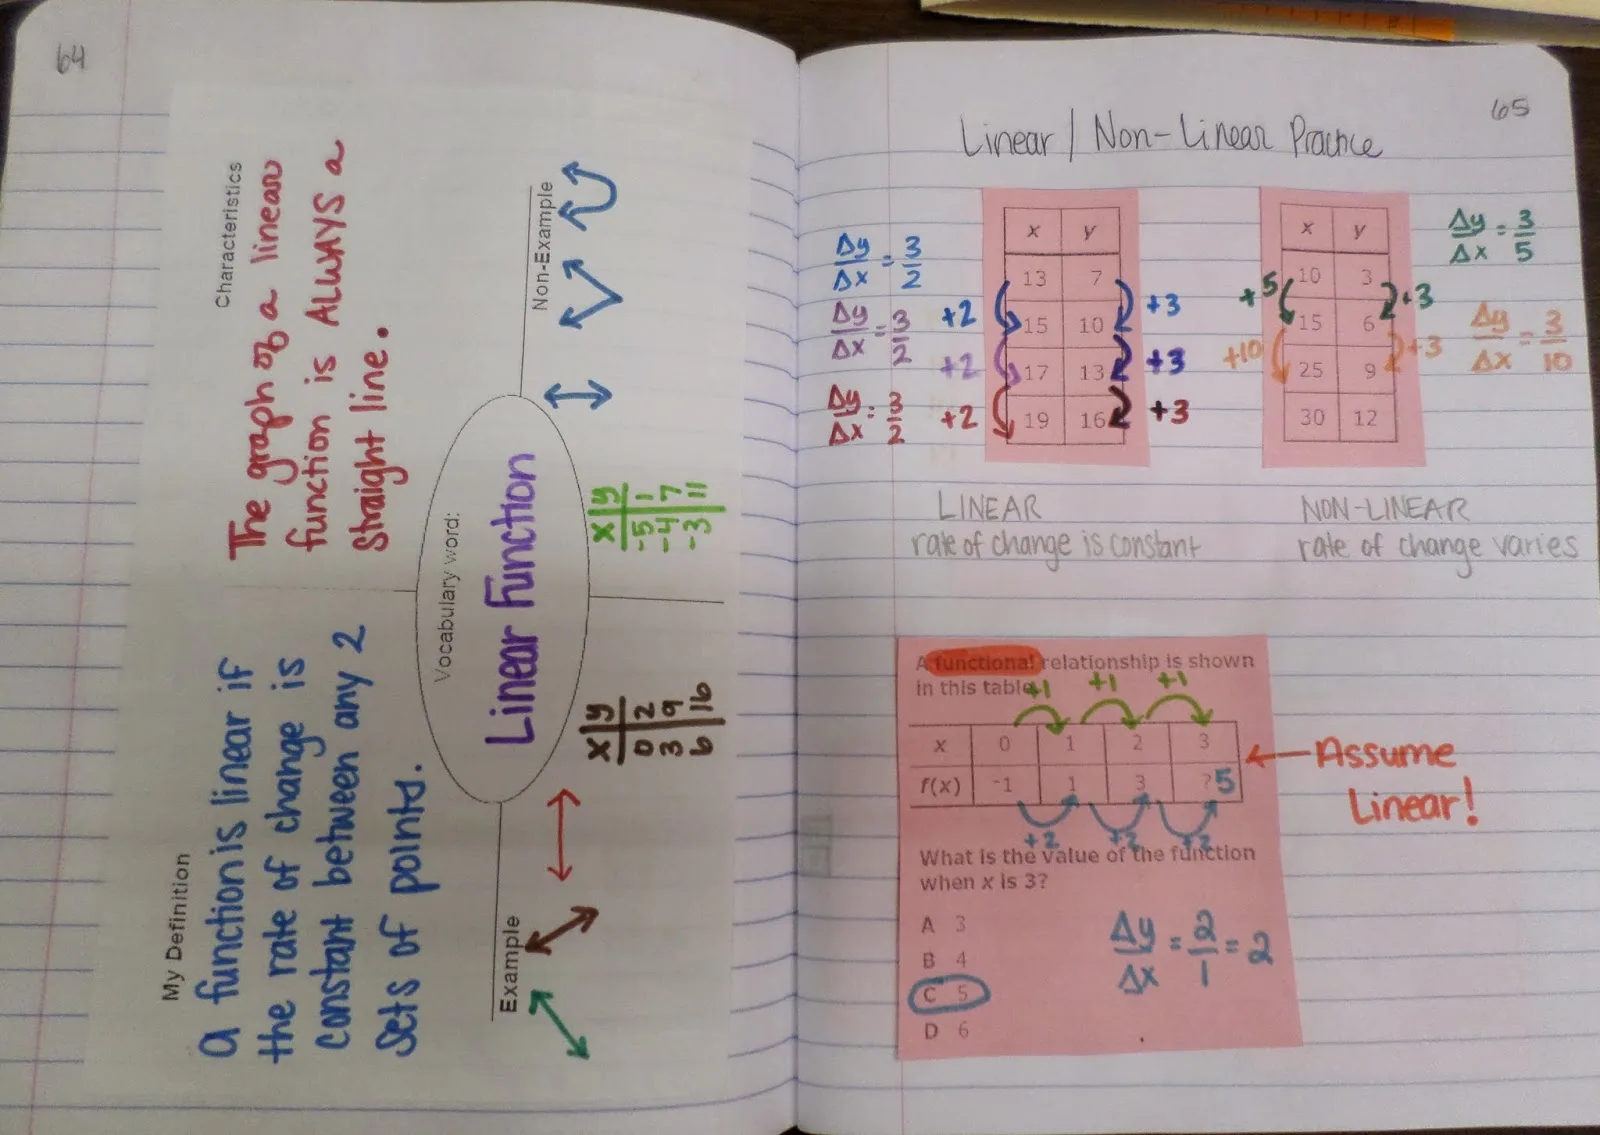 linear function frayer model (left page) and linear vs non-linear practice (right page) interactive notebook page for algebra 1 